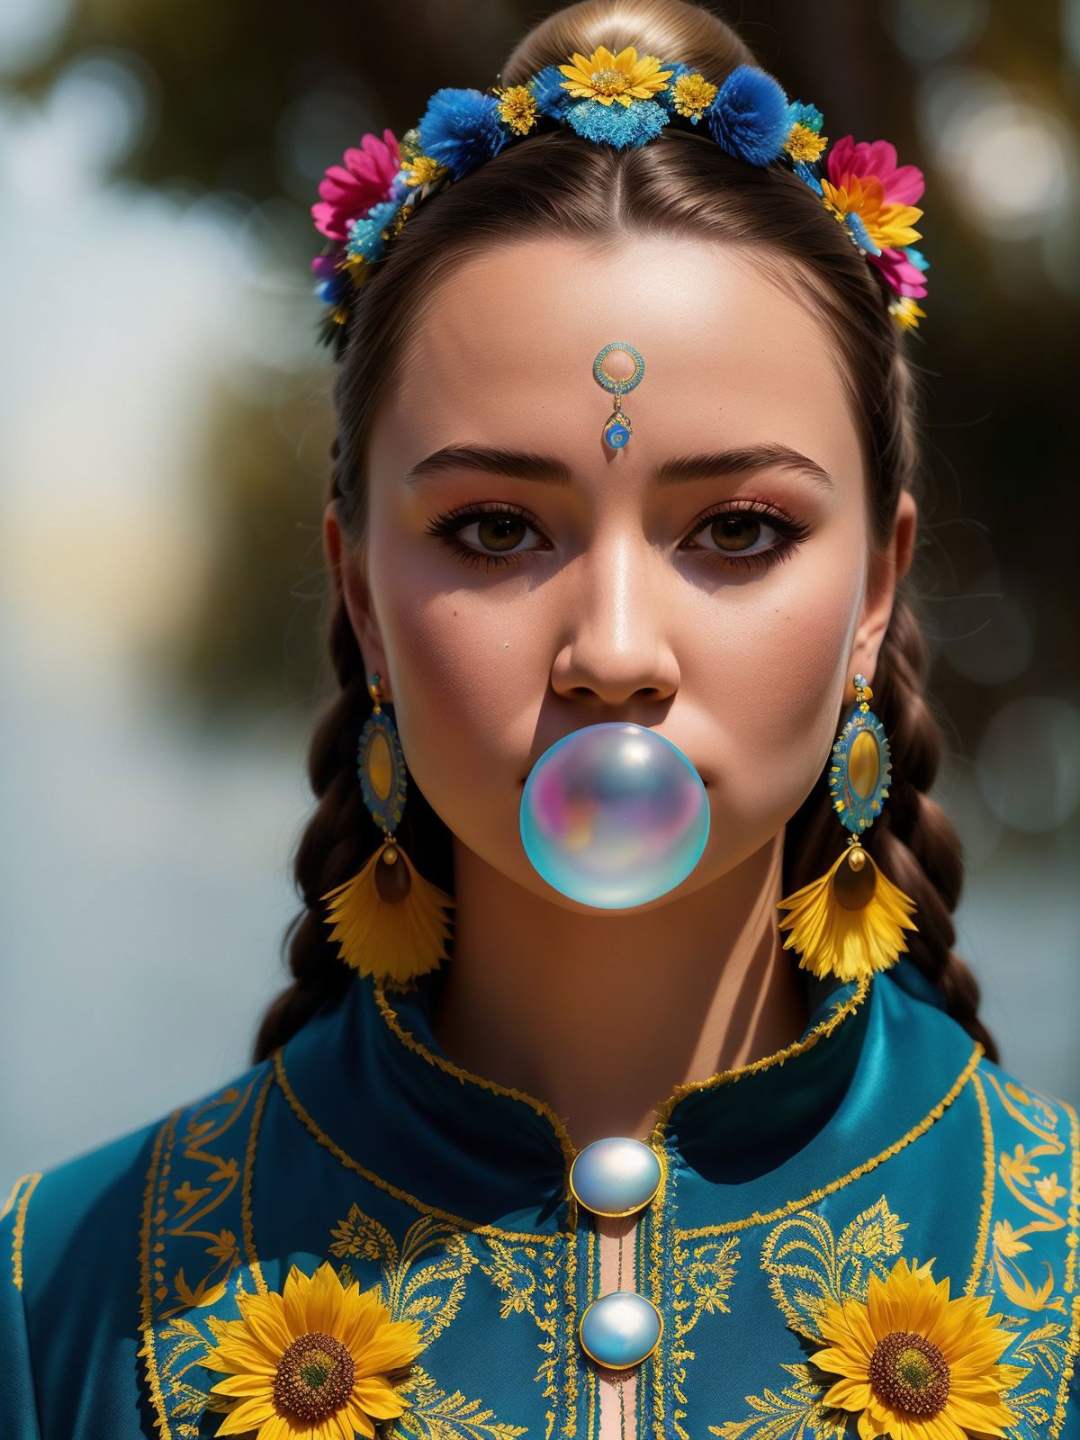 (80mm anamorphic lens flare:0,75), (artful bokeh depth of field:1.6), ((close up photorealistic portrait)), (person Slavic. vyshyvanka outfit, walks proudly above the water surface:1.4), the mermaids with realistic hair, long braids), with delight face expressions looking at walking above the water surface in, (detailed professional photography:1.3), (dark shot:1.2),(cinematic scar on face:0.88), (realistic sweat skin:1.2), (tree on background:1.1), (bent in flowers scene:1.2), Slavic folklore composition, (sunflowers on background:0.81), (blue fur coat:0,88), (outfit yellow and blue color tone), (hdr:1.28), hyperdetailed, cinematic, accent warm light, cold background color tone, intricate details, hyperrealistic, (muted colors:1.38), (neutral colors:1.2), intricate, elegant, sharp focus, (Geof Darrow:1,2), soft lighting, vibrant colors, (high contrast), (masterpiece), (detailed face). blow bubble gum <lora:Bubble Gum_v2.0:0.5>